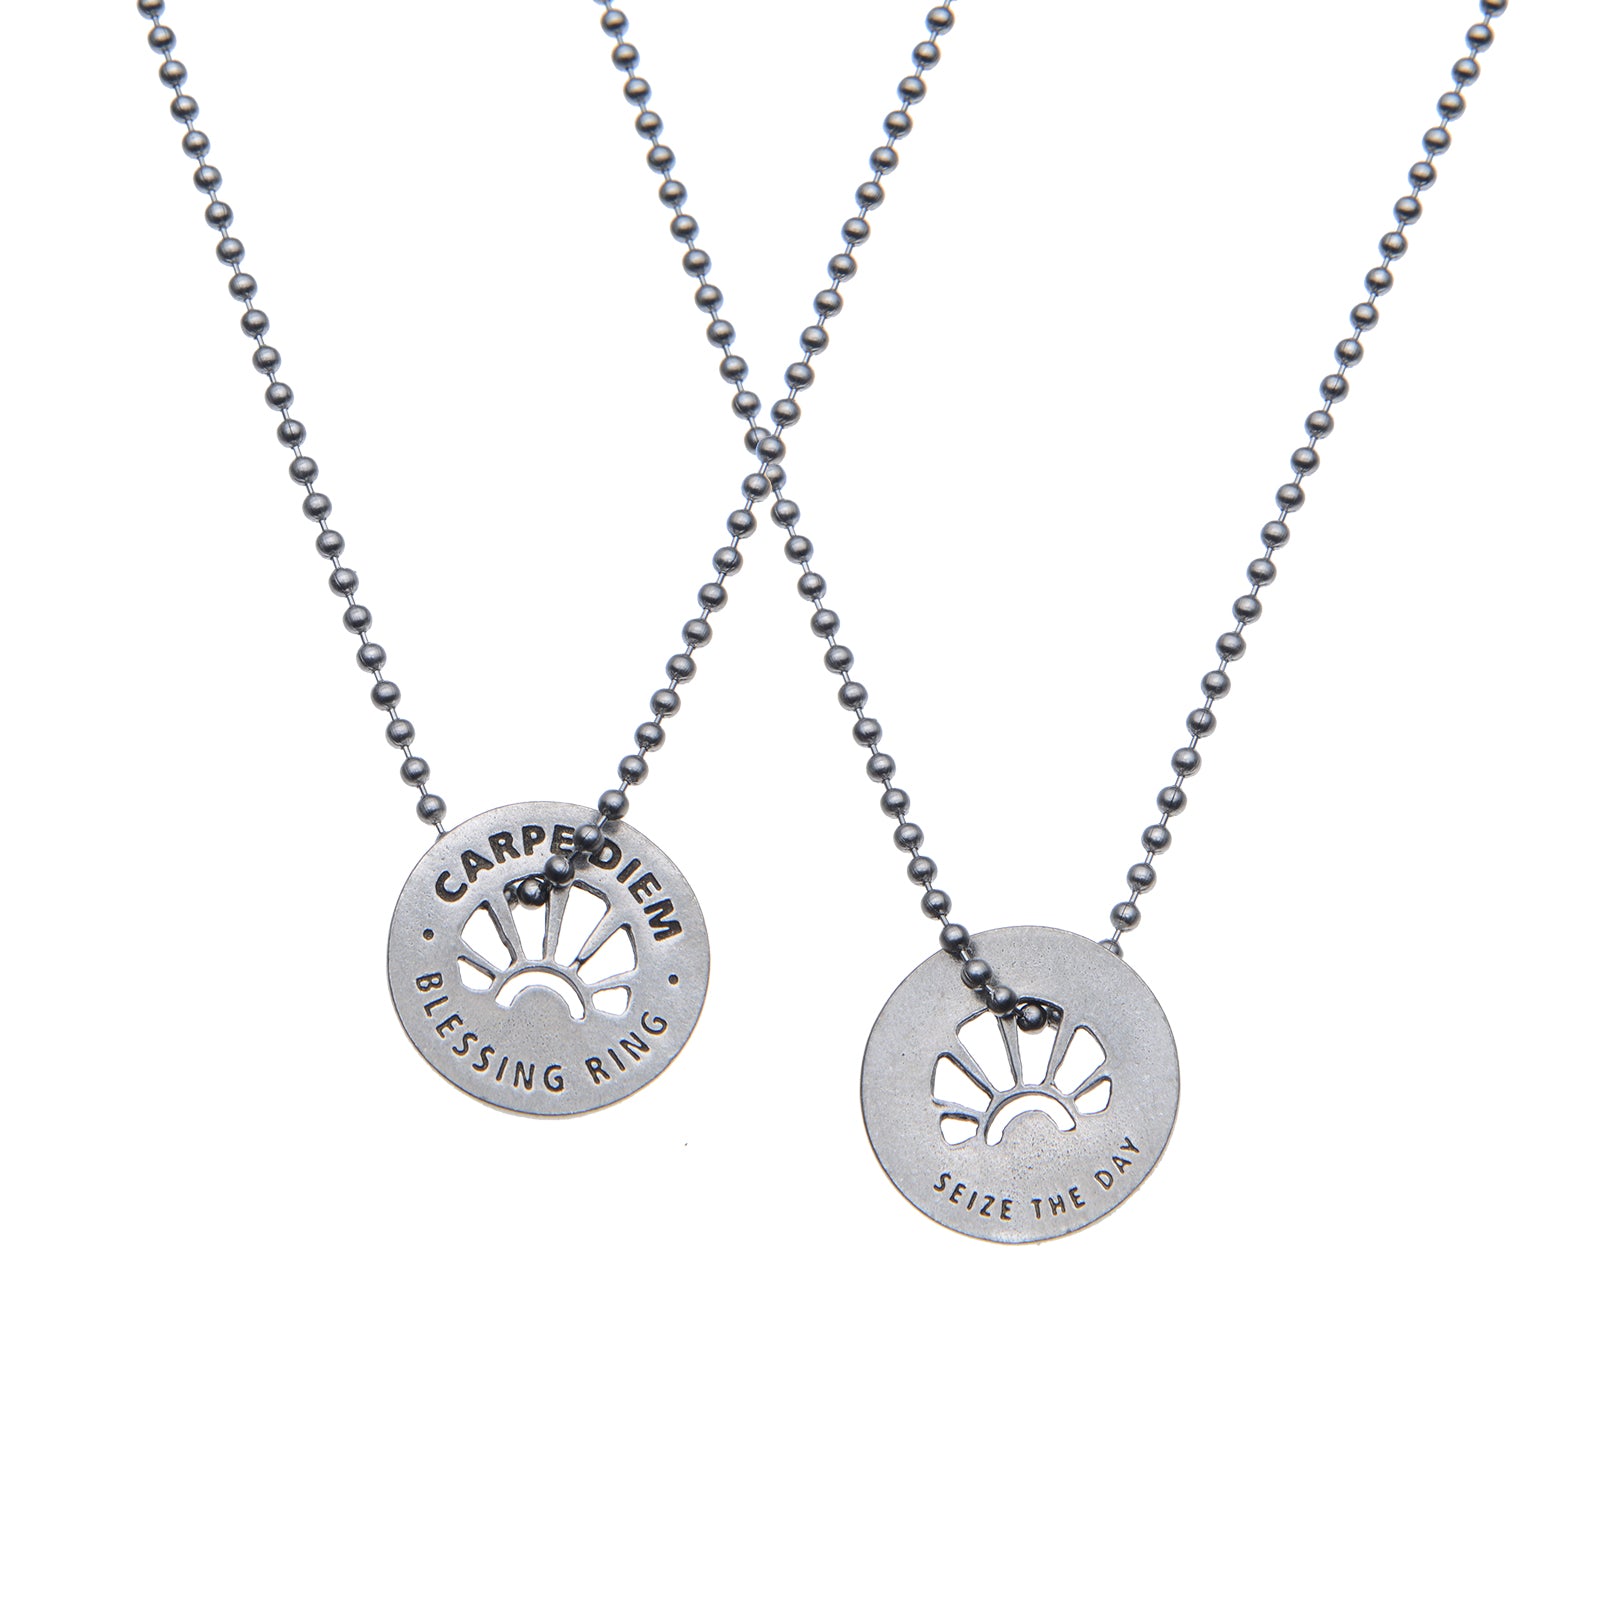 Carpe Diem Blessing Ring on a necklace